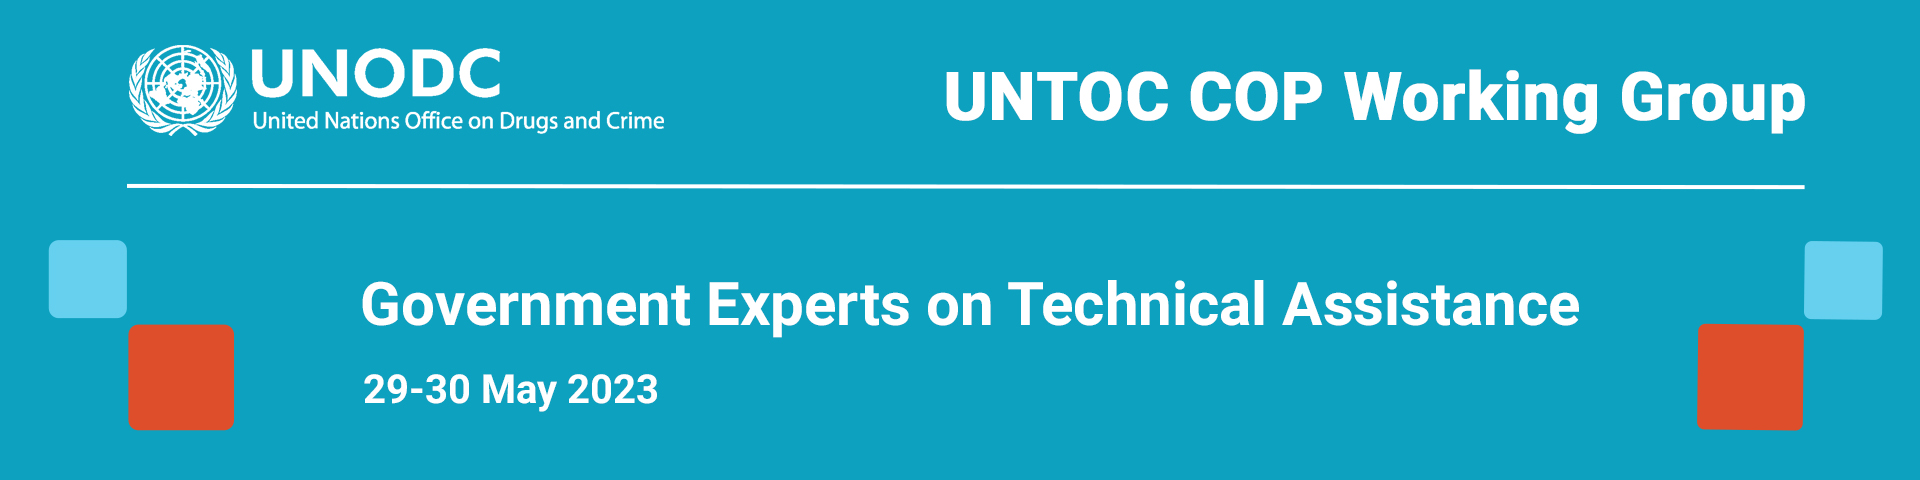 Visual with the logo of UNODC. The following text appears on the visual: "UNTOC COP Working Group - Government Experts on Technical Assistance - 29-30 May 2023". 